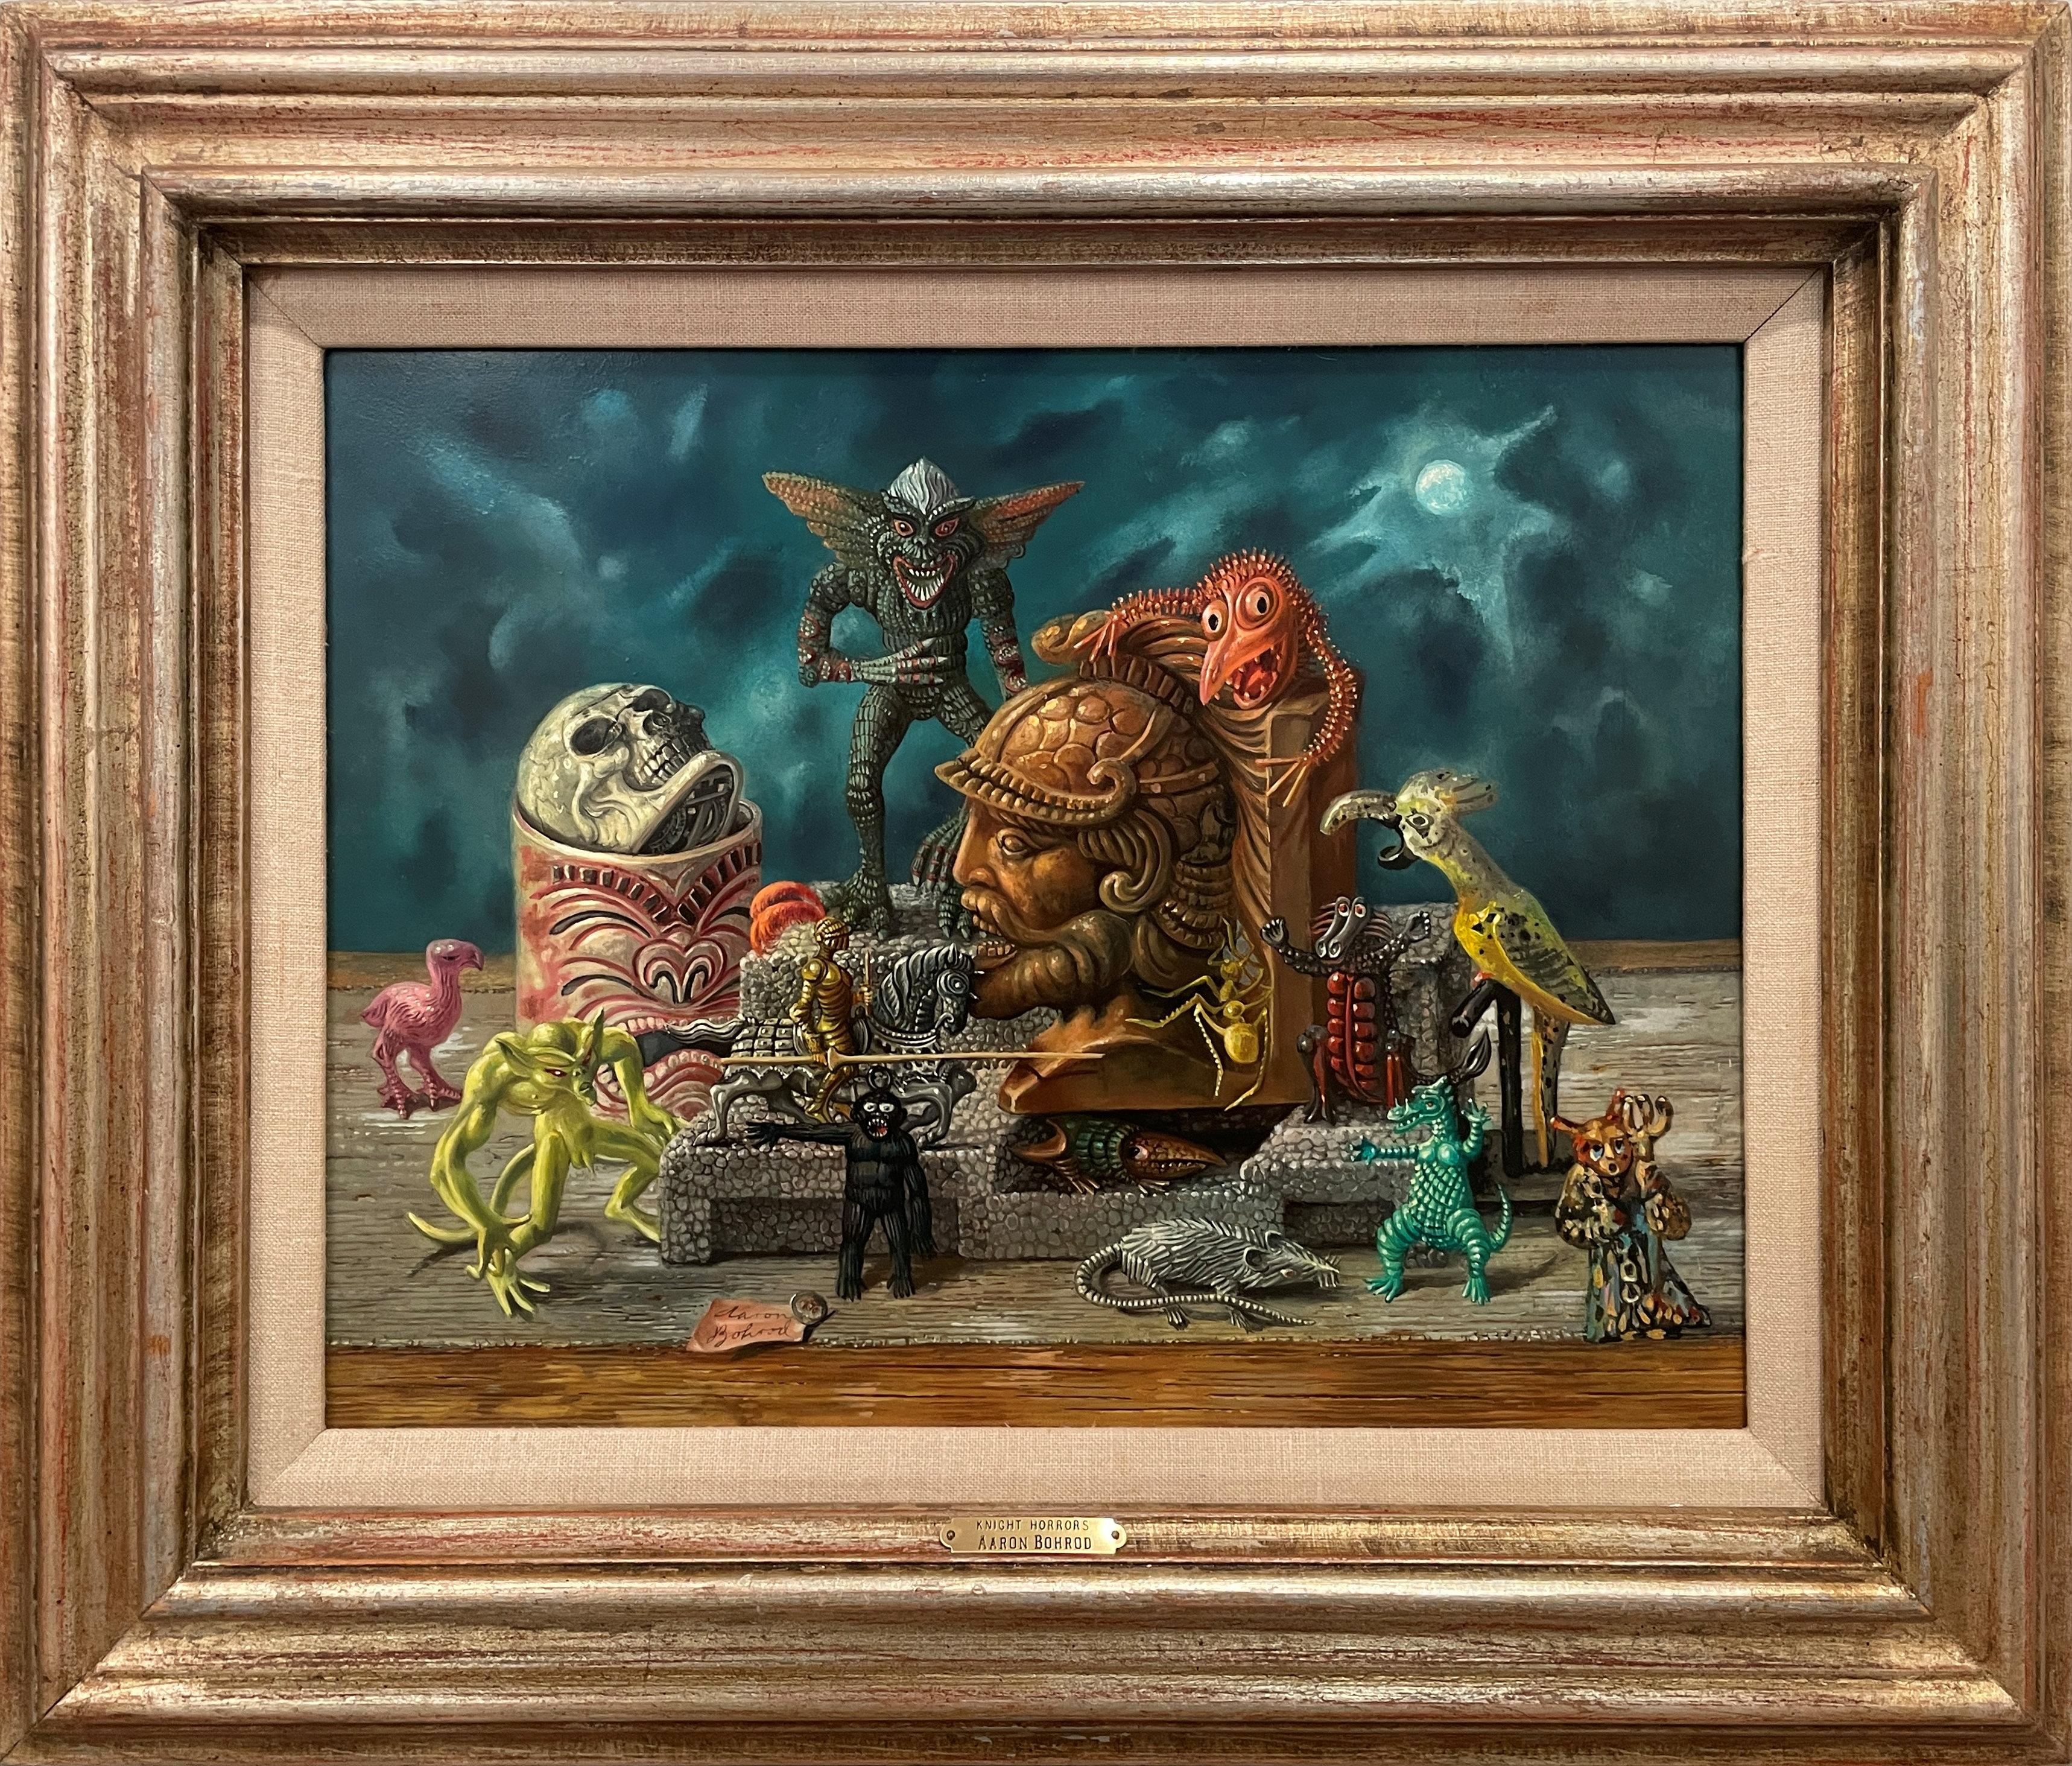 Aaron Bohrod
Knight Horrors, 1985
Signed lower left
Oil on gesso panel
12 x 16 inches

Aaron Bohrod's work has not been limited to one style or medium. Initially recognized as a regionalist painter of American scenes, particularly of his native